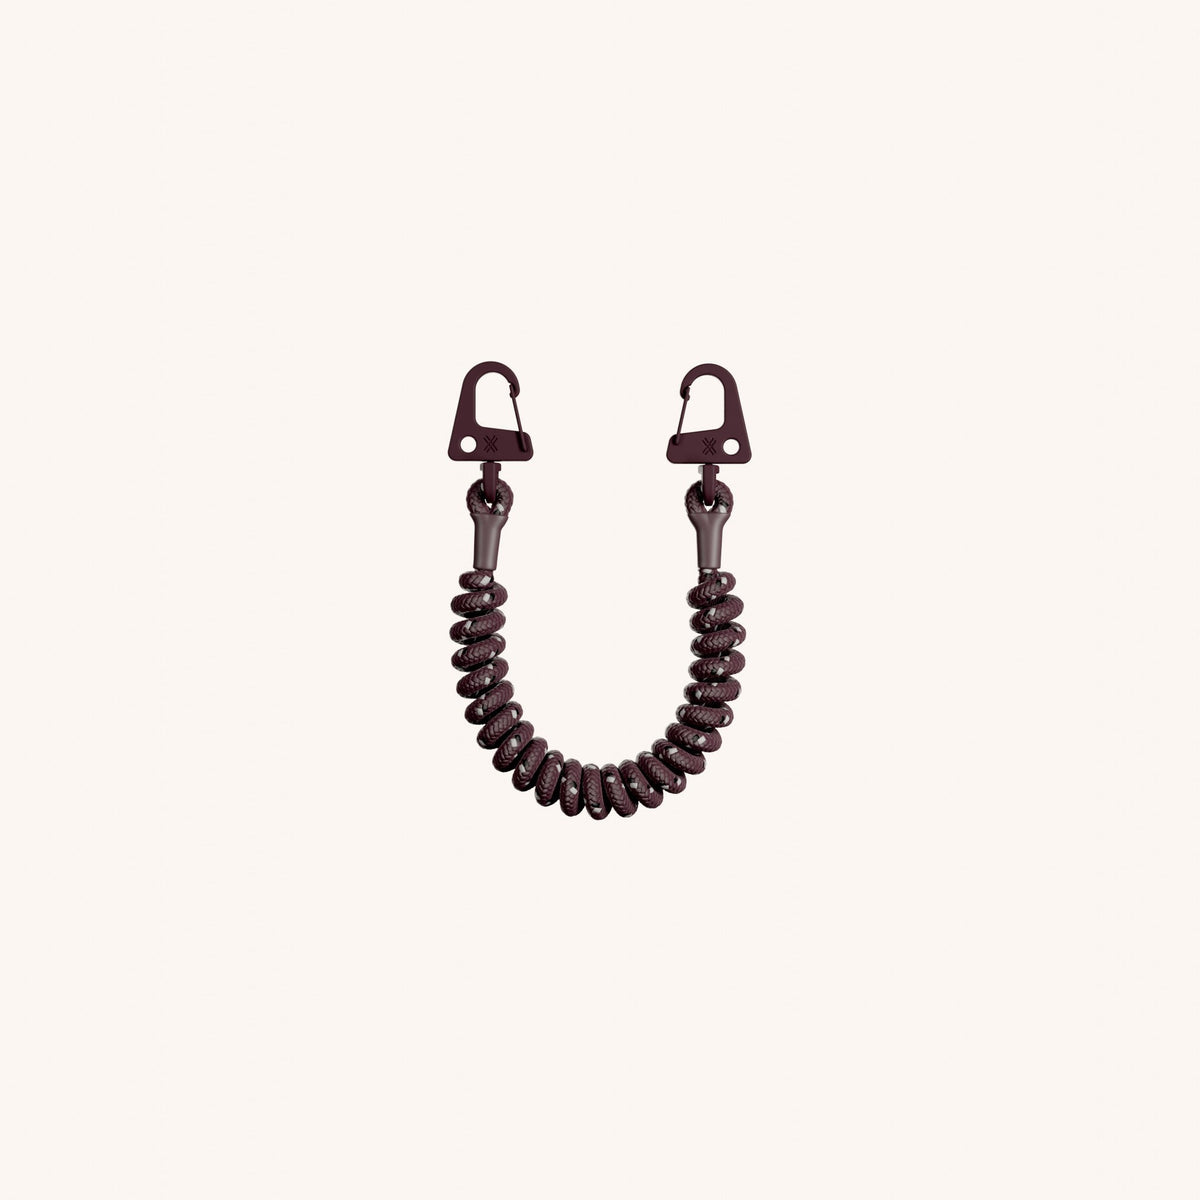 Phone Strap Spiral Rope in Burgundy Total View | XOUXOU